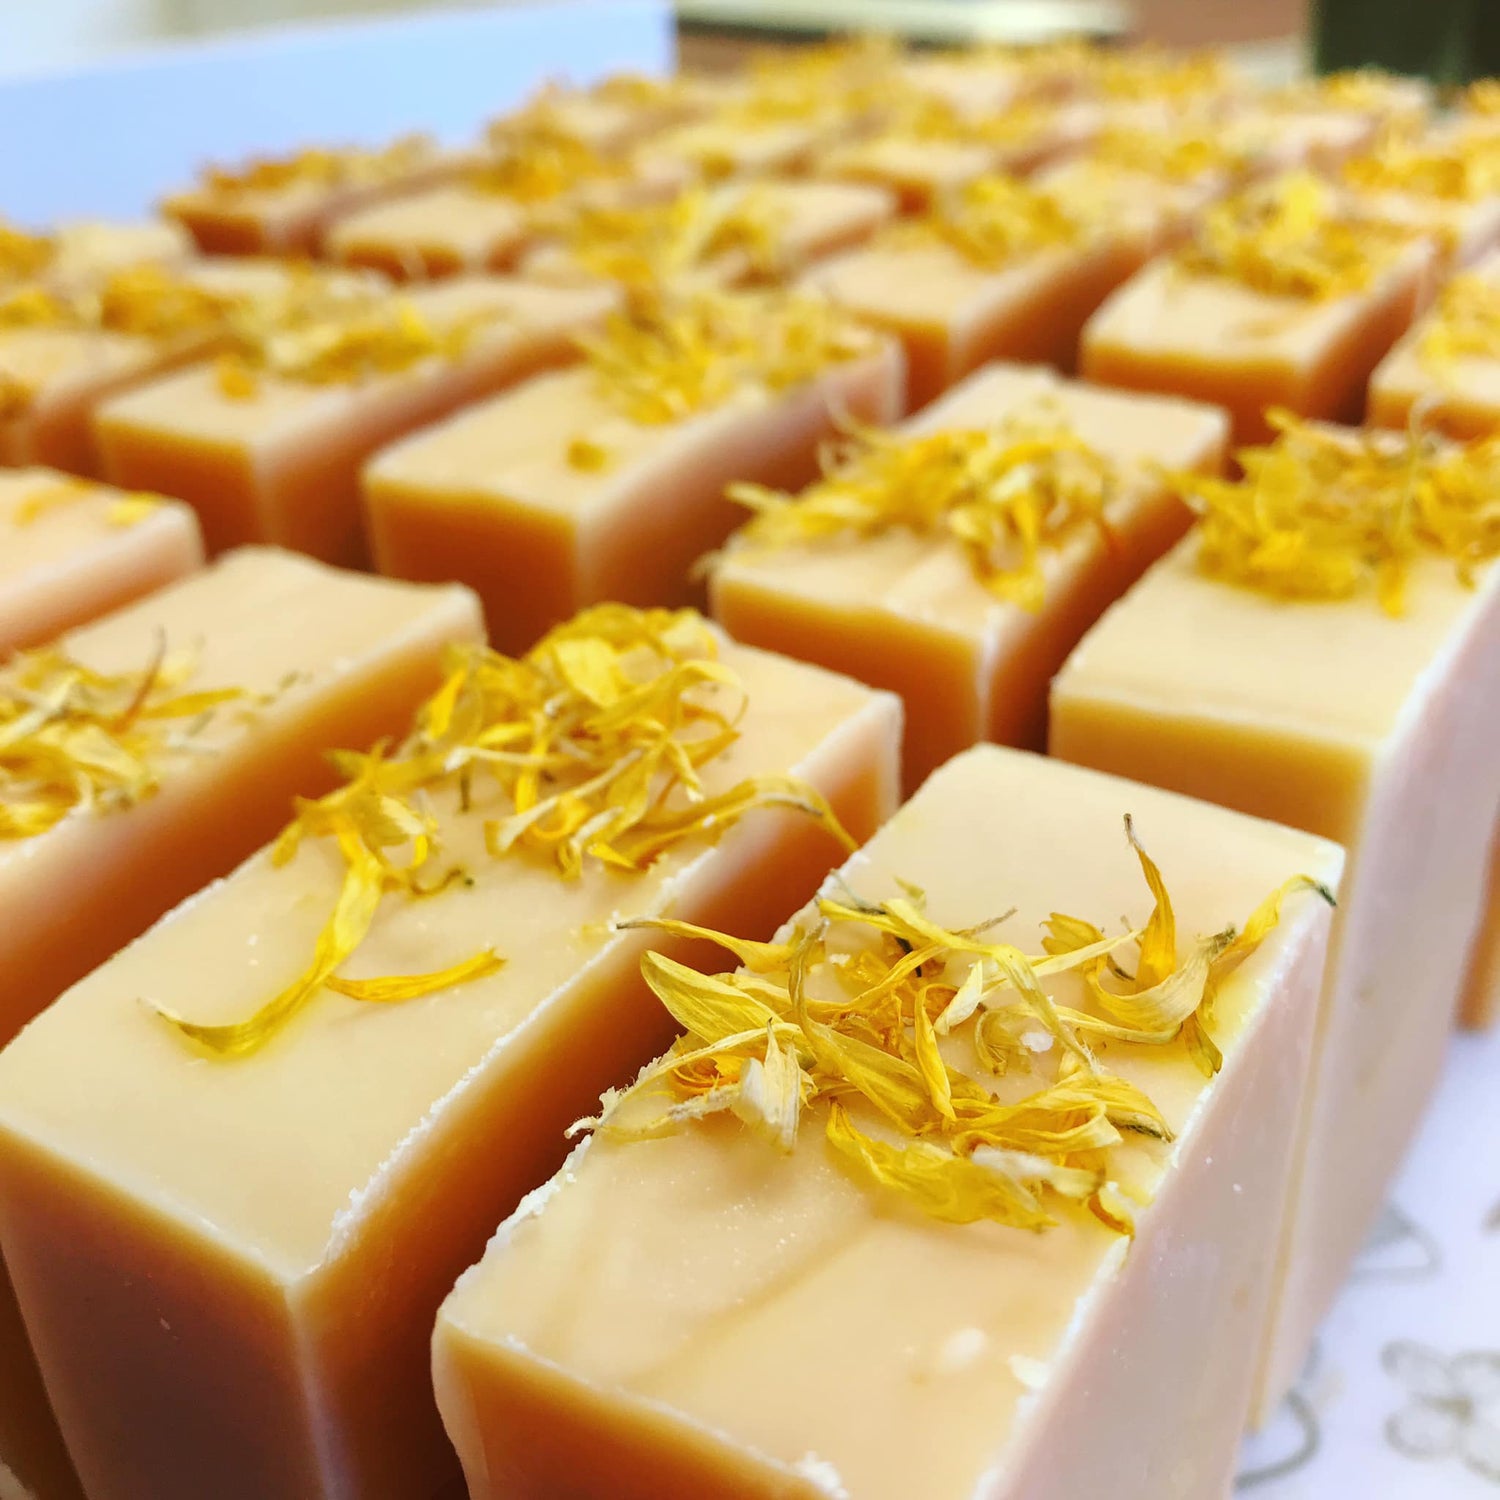 Collection of yellow bars of soap with calendula petals on top all uniform, lined up next to each other